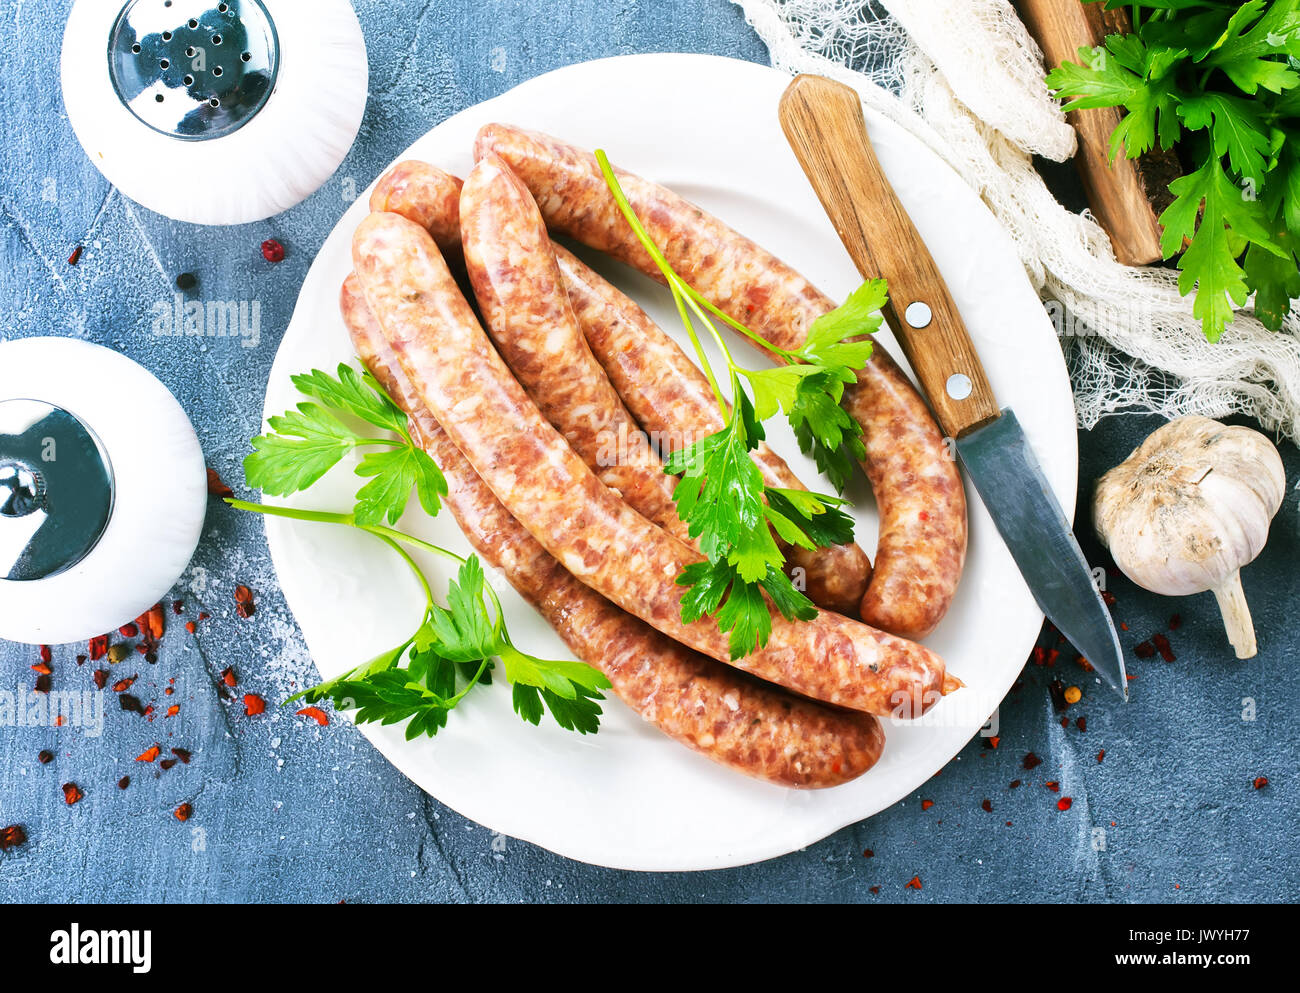 sausages with spice on white plate. stock photo Stock Photo